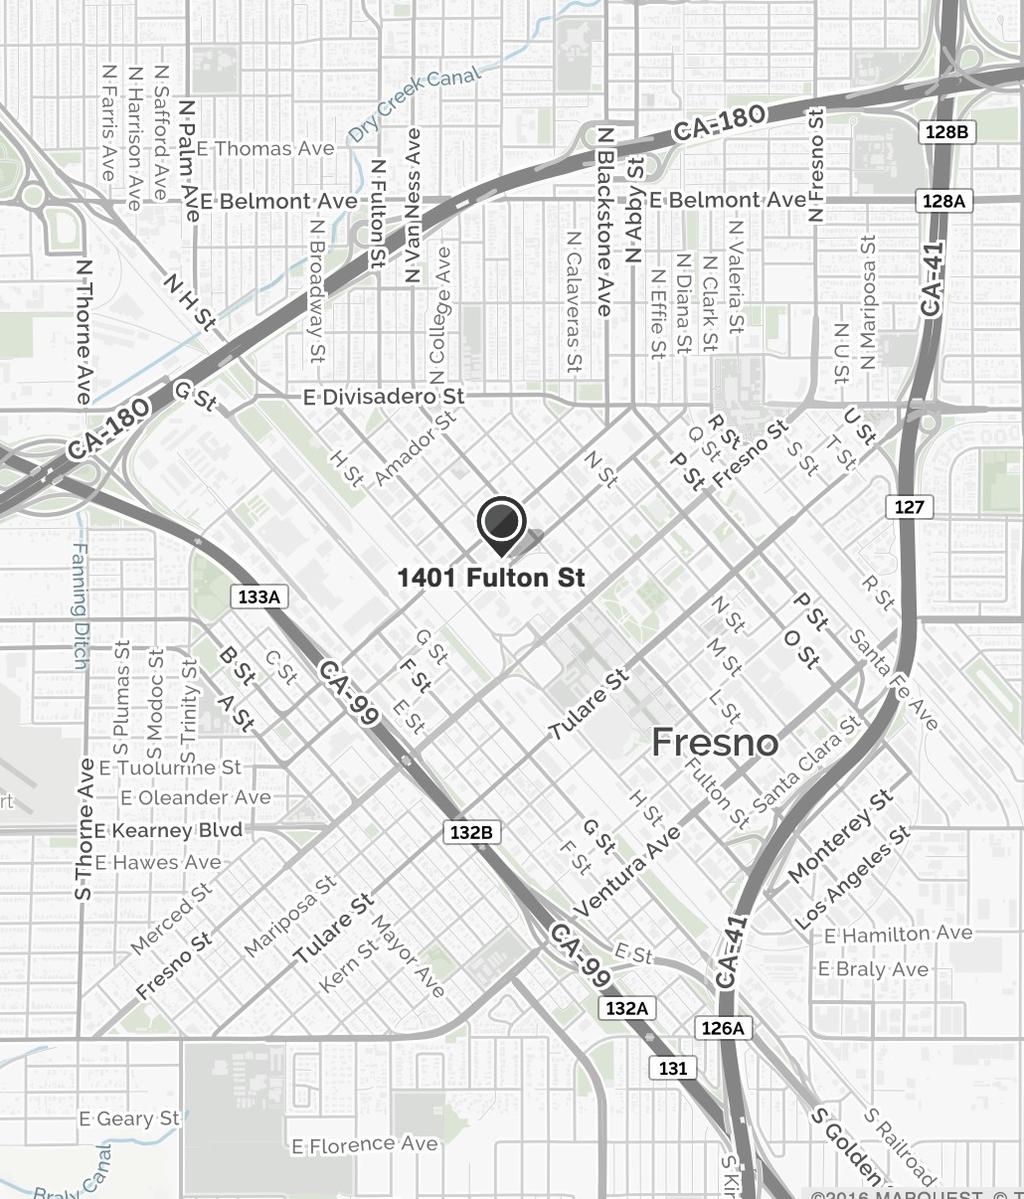 The building is in an ideal location within Fresno, and perfect for the needs of modern companies